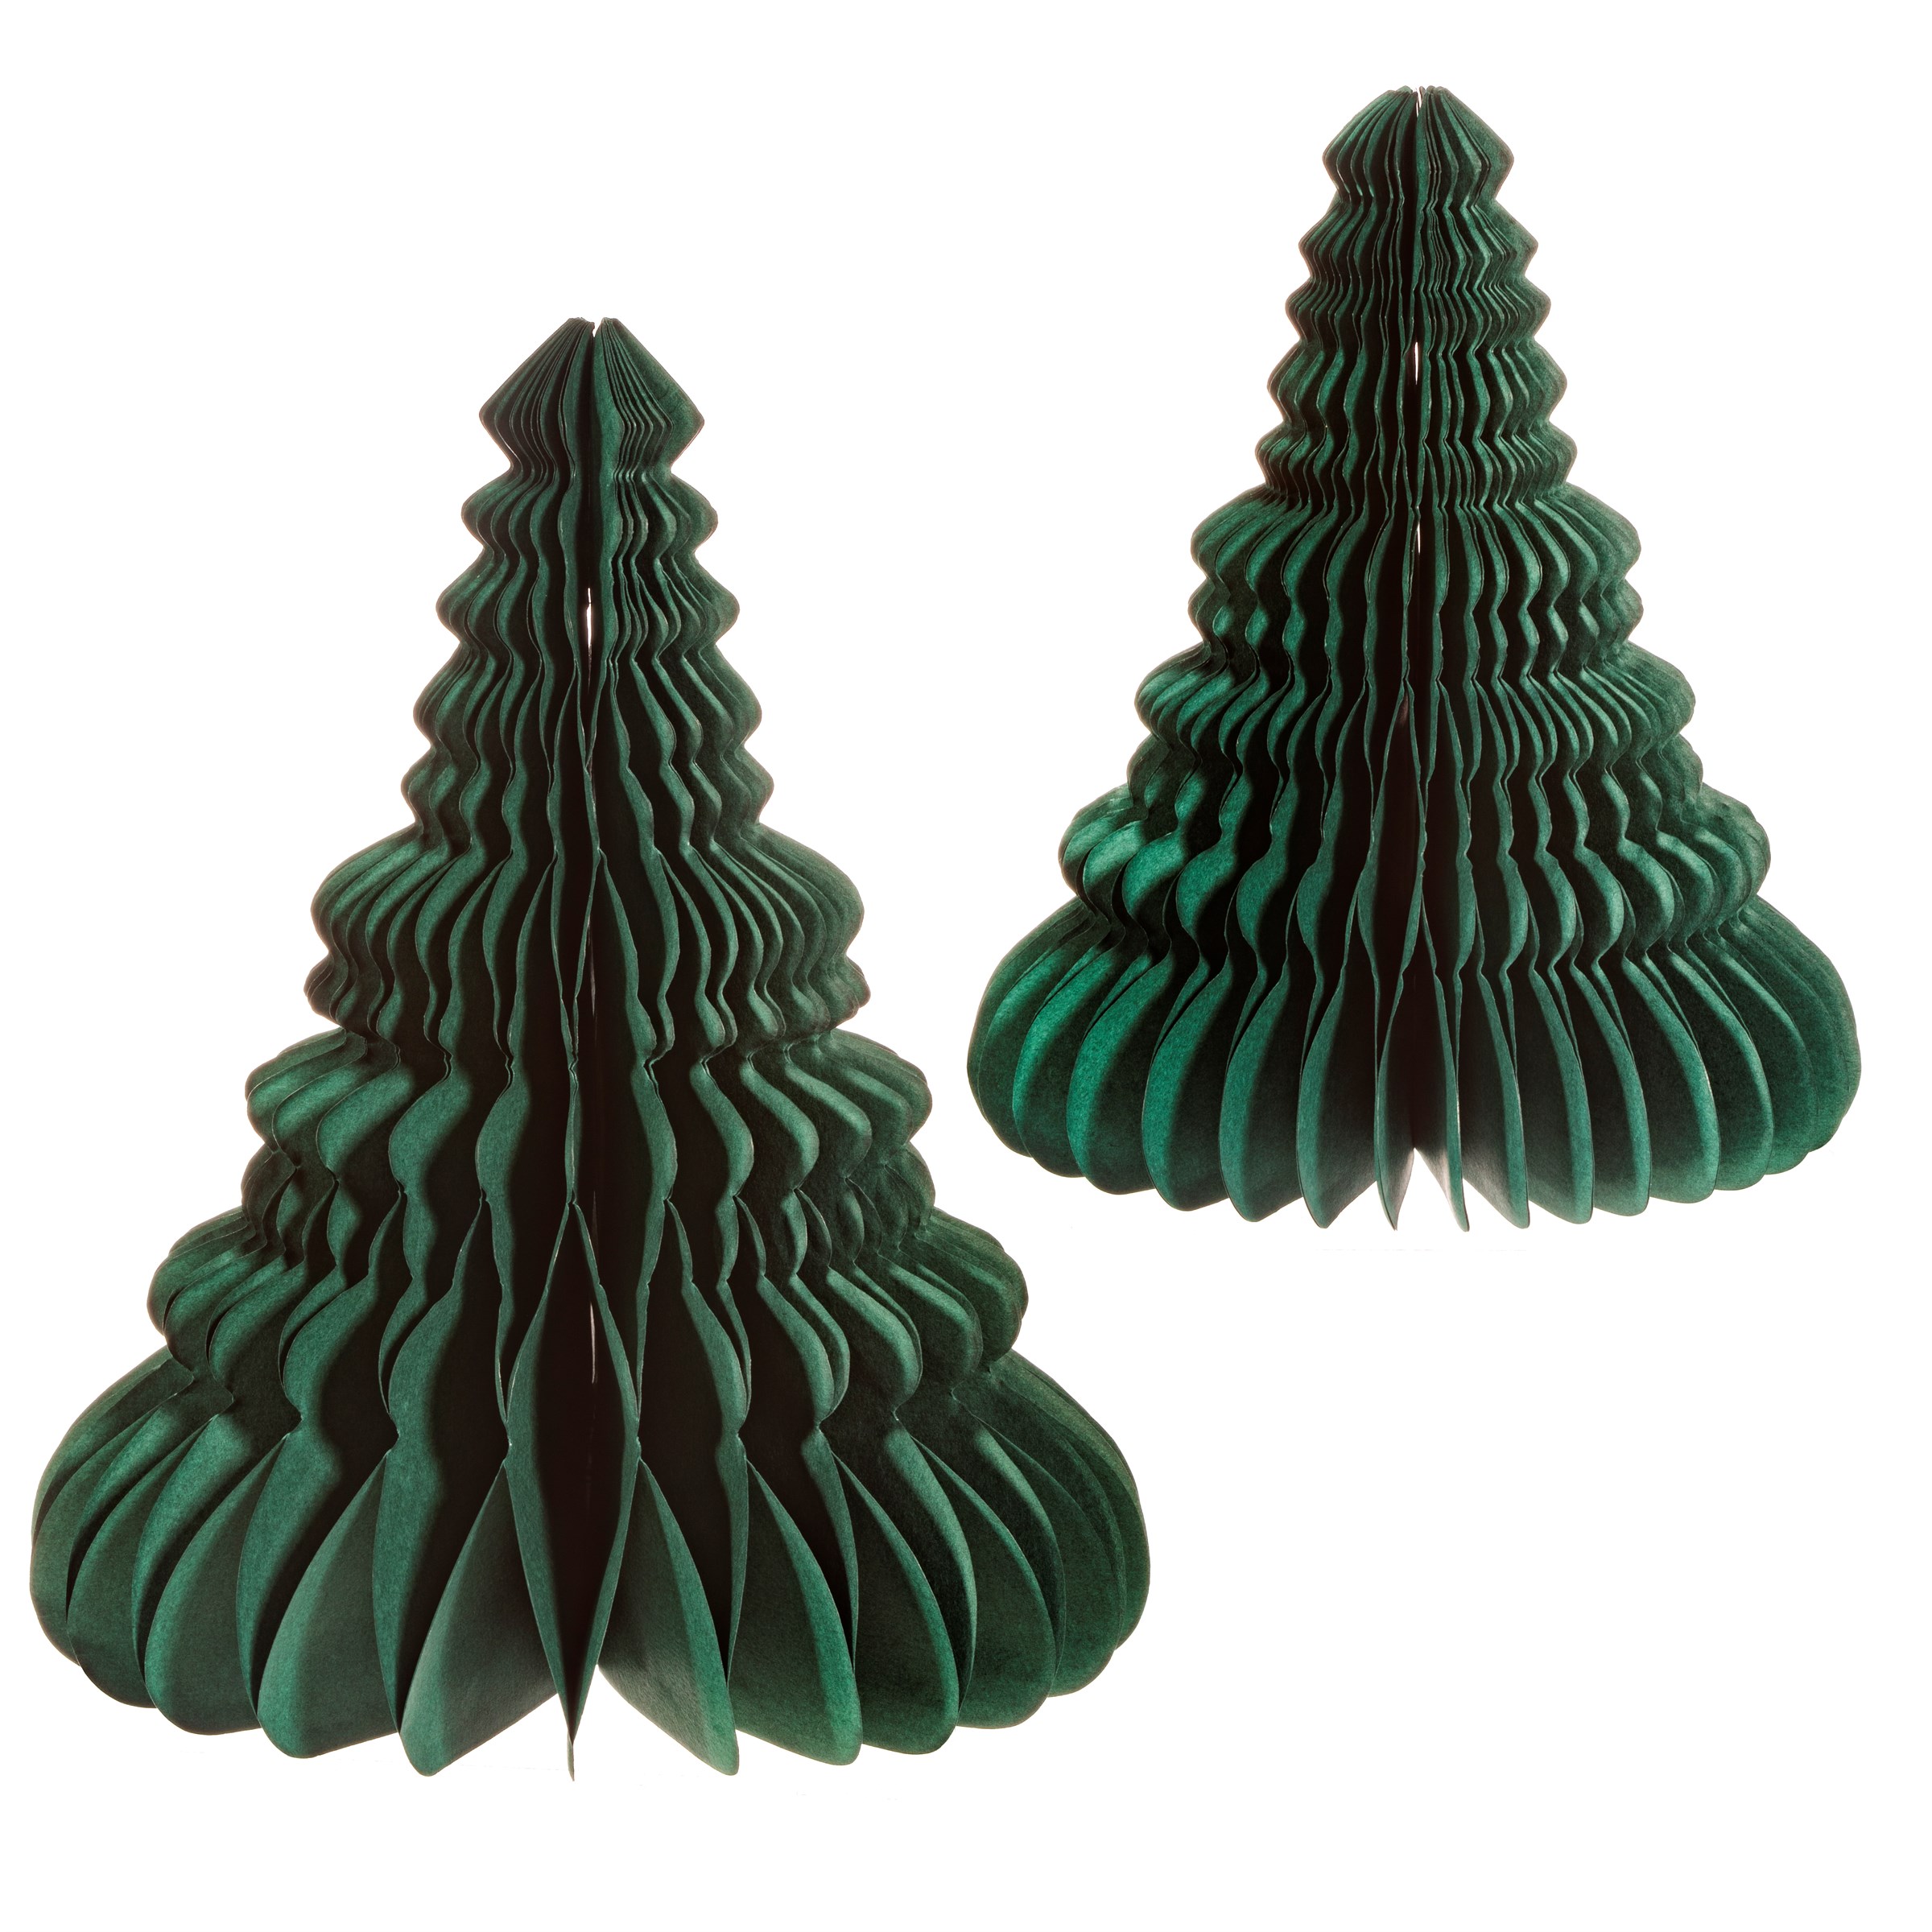 Sass & Belle  Forest Green Honeycomb Tree Standing Decoration - Set of 2